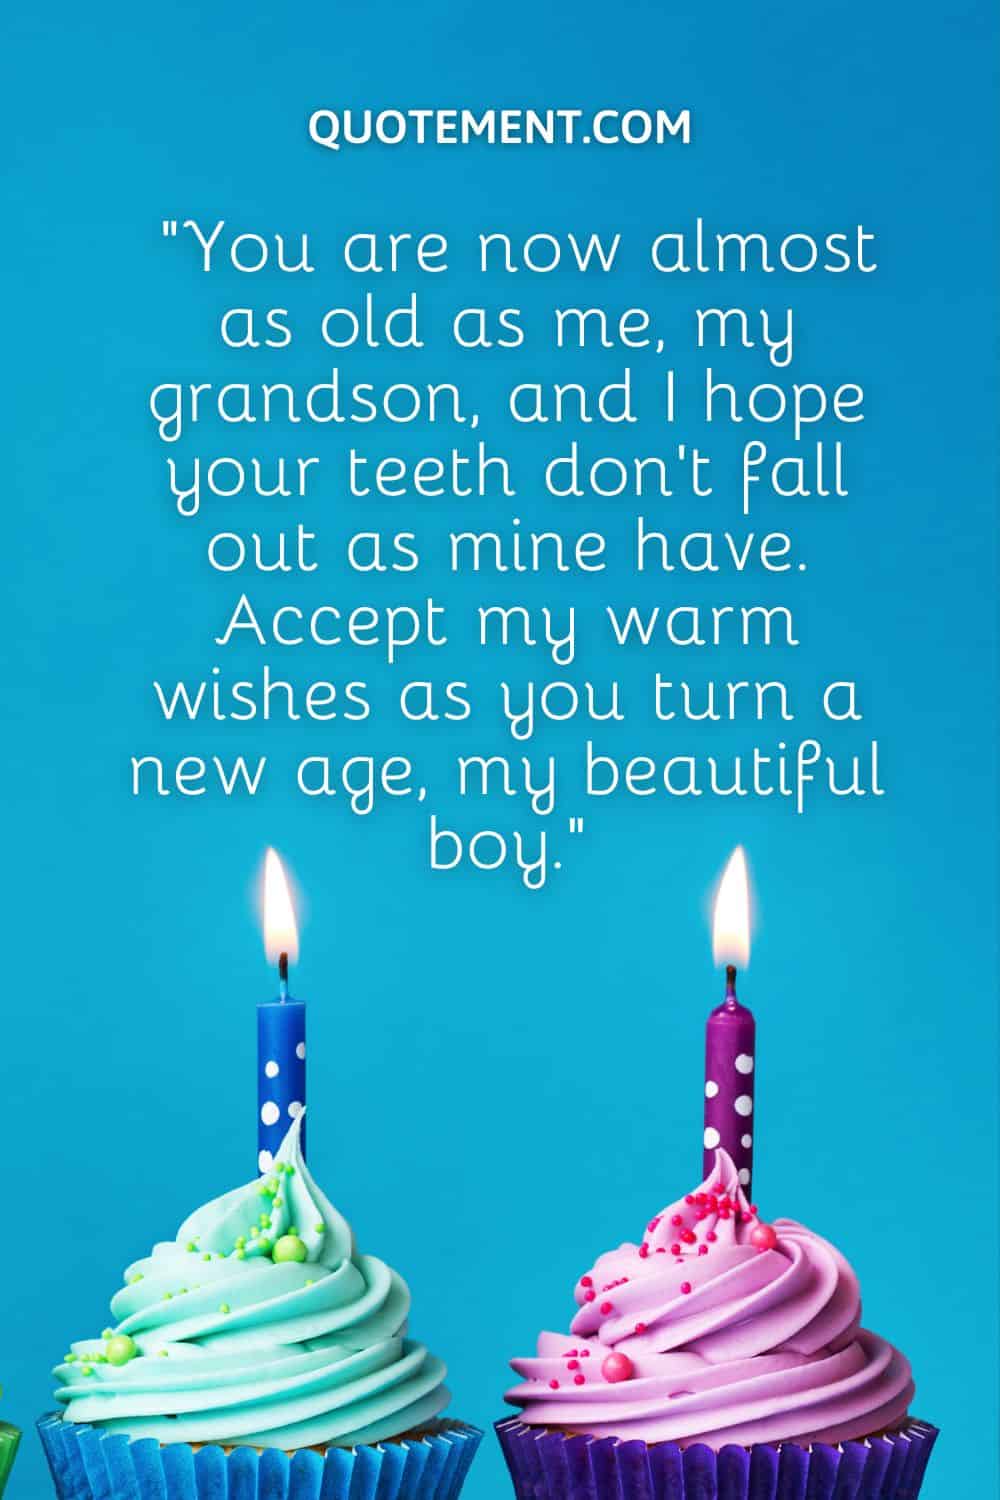 “You are now almost as old as me, my grandson, and I hope your teeth don’t fall out as mine have. Accept my warm wishes as you turn a new age, my beautiful boy.”